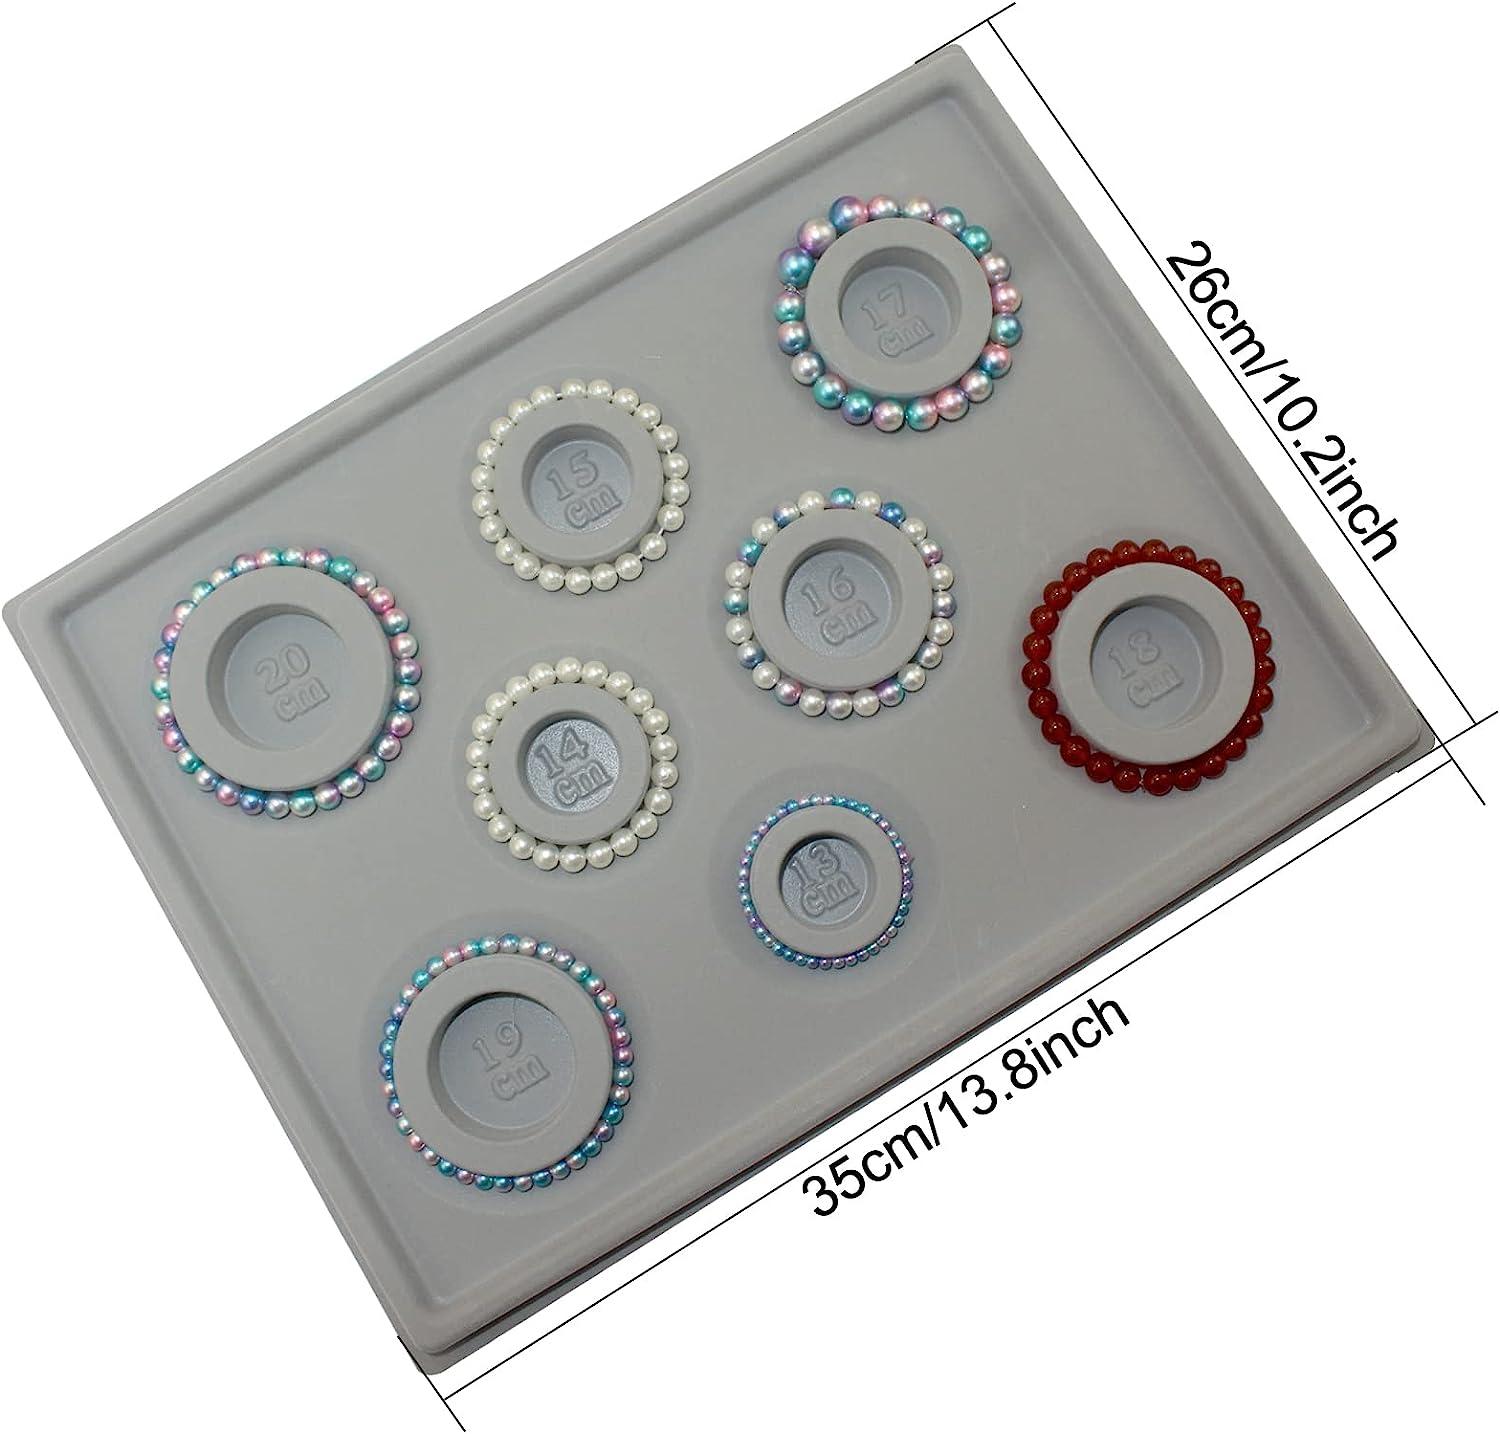 2 Pieces Beading Boards Bead Design Trays Necklace Bracelet Beading Jewelry  Design Mats for DIY Jewelry Making